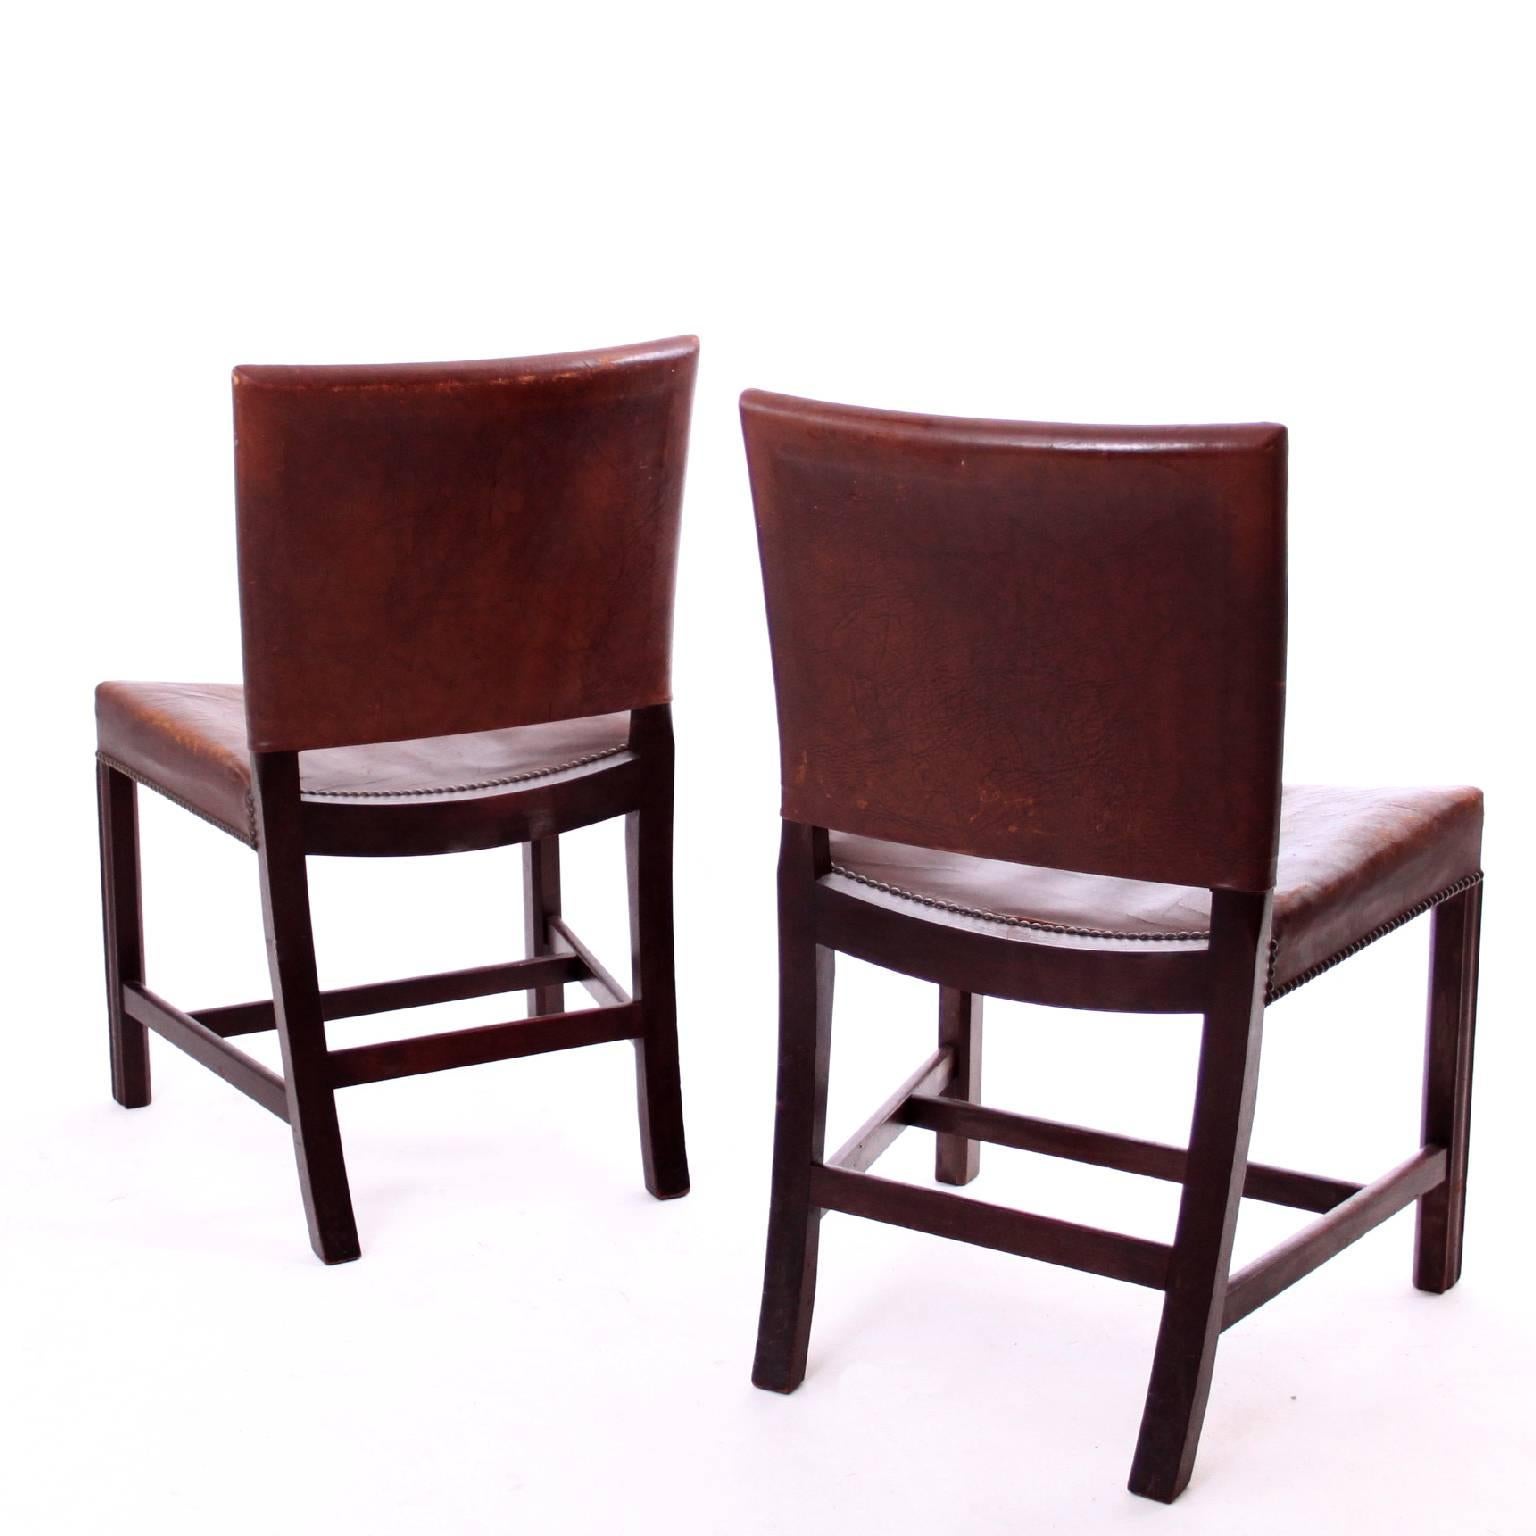 Danish A Pair of Kaare Klint Red Chairs in Brown Leather by Rud Rasmussen, 1930s